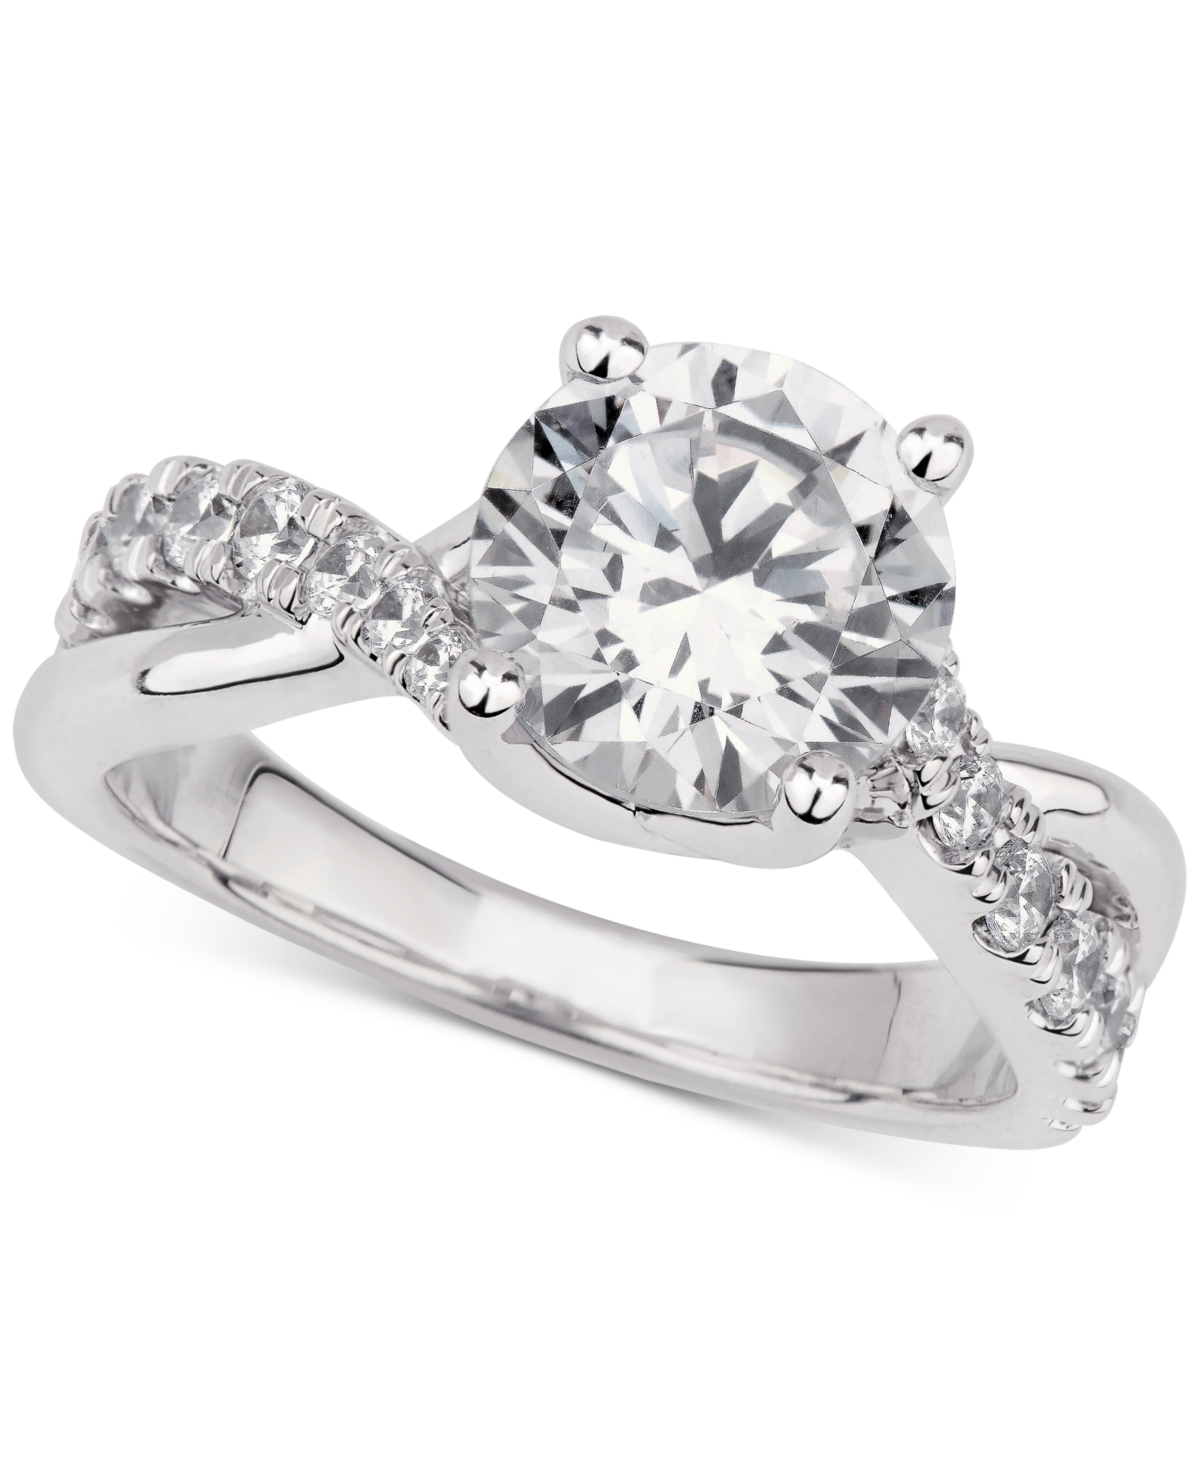 Gia Certified Diamonds Gia Certified Diamond Twist Shank Engagement Ring (2-1/2 ct. t.w.) in 14k White Gold